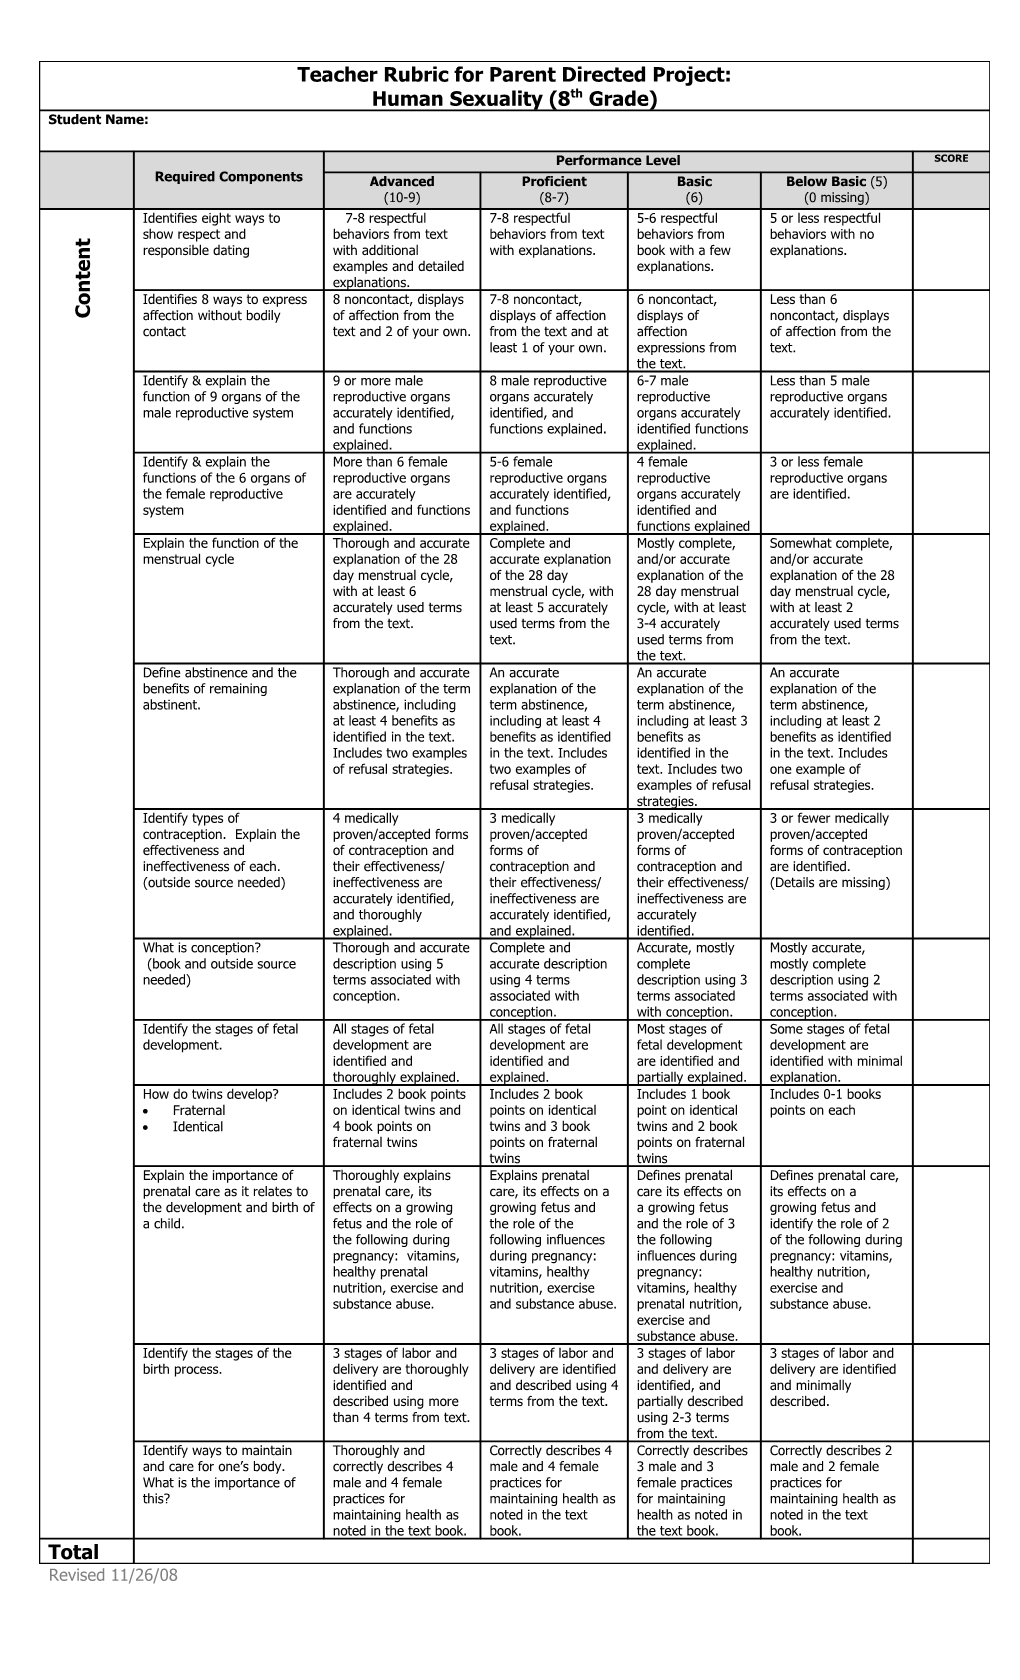 Human Sexuality Opt out Rubric